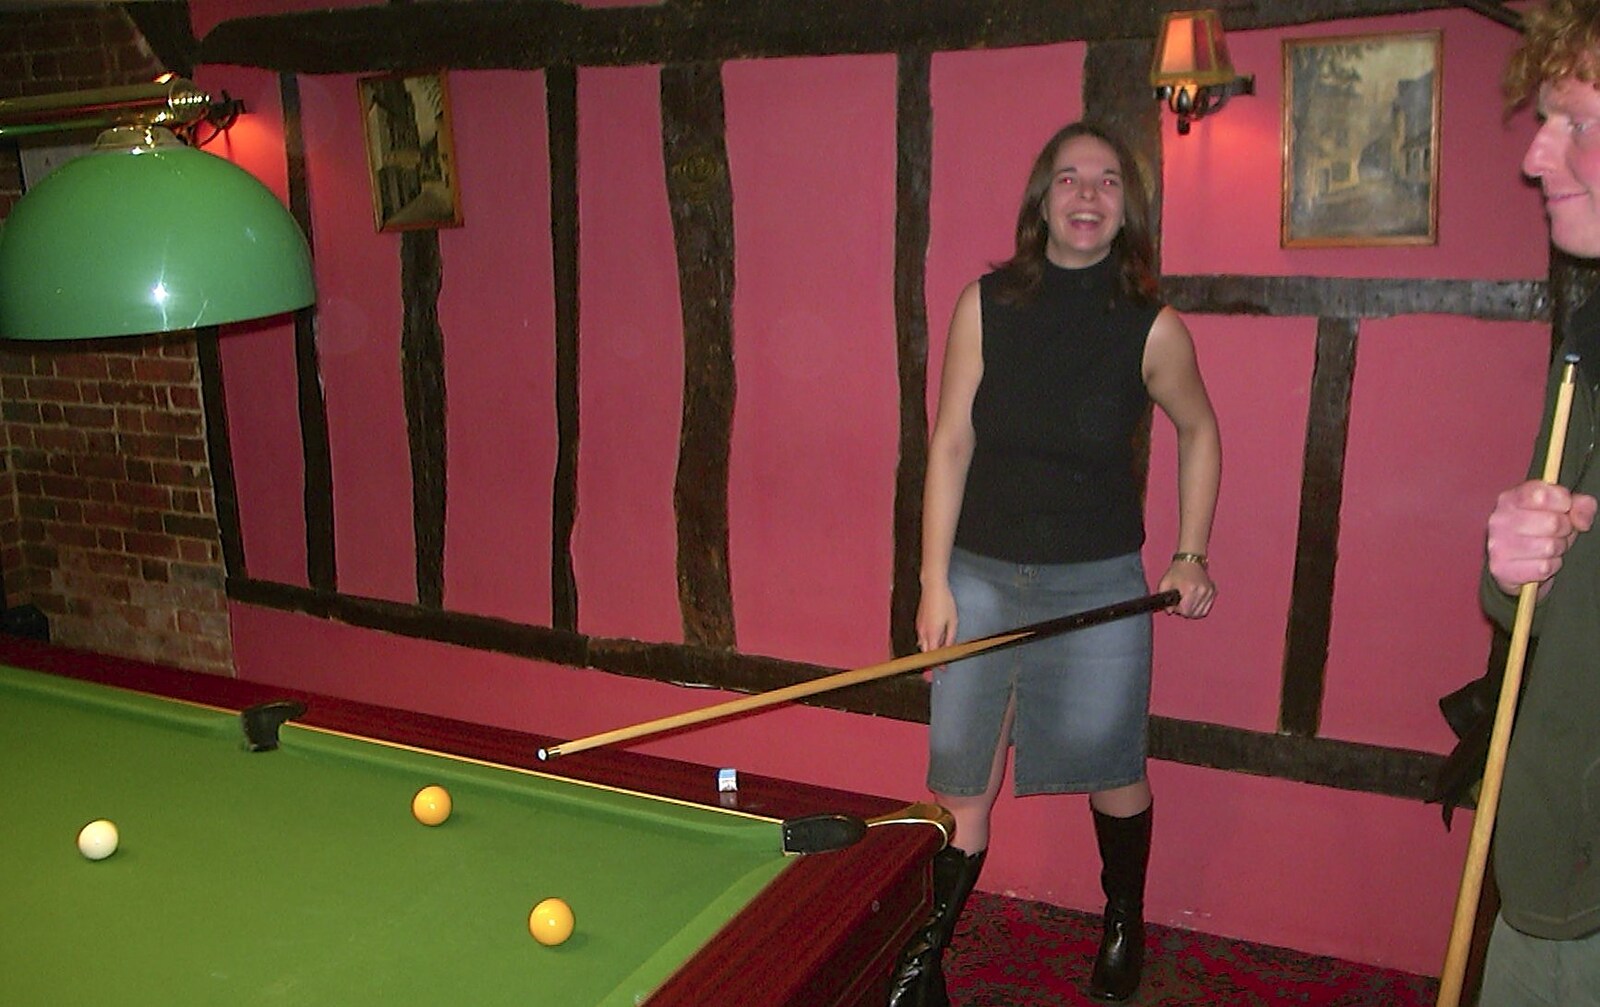 A March Miscellany: The BBs, Pulham Pubs and Broken Cars - Norfolk and Cambridgeshire, 31st March 2004: Stick game at the Pulham Crown